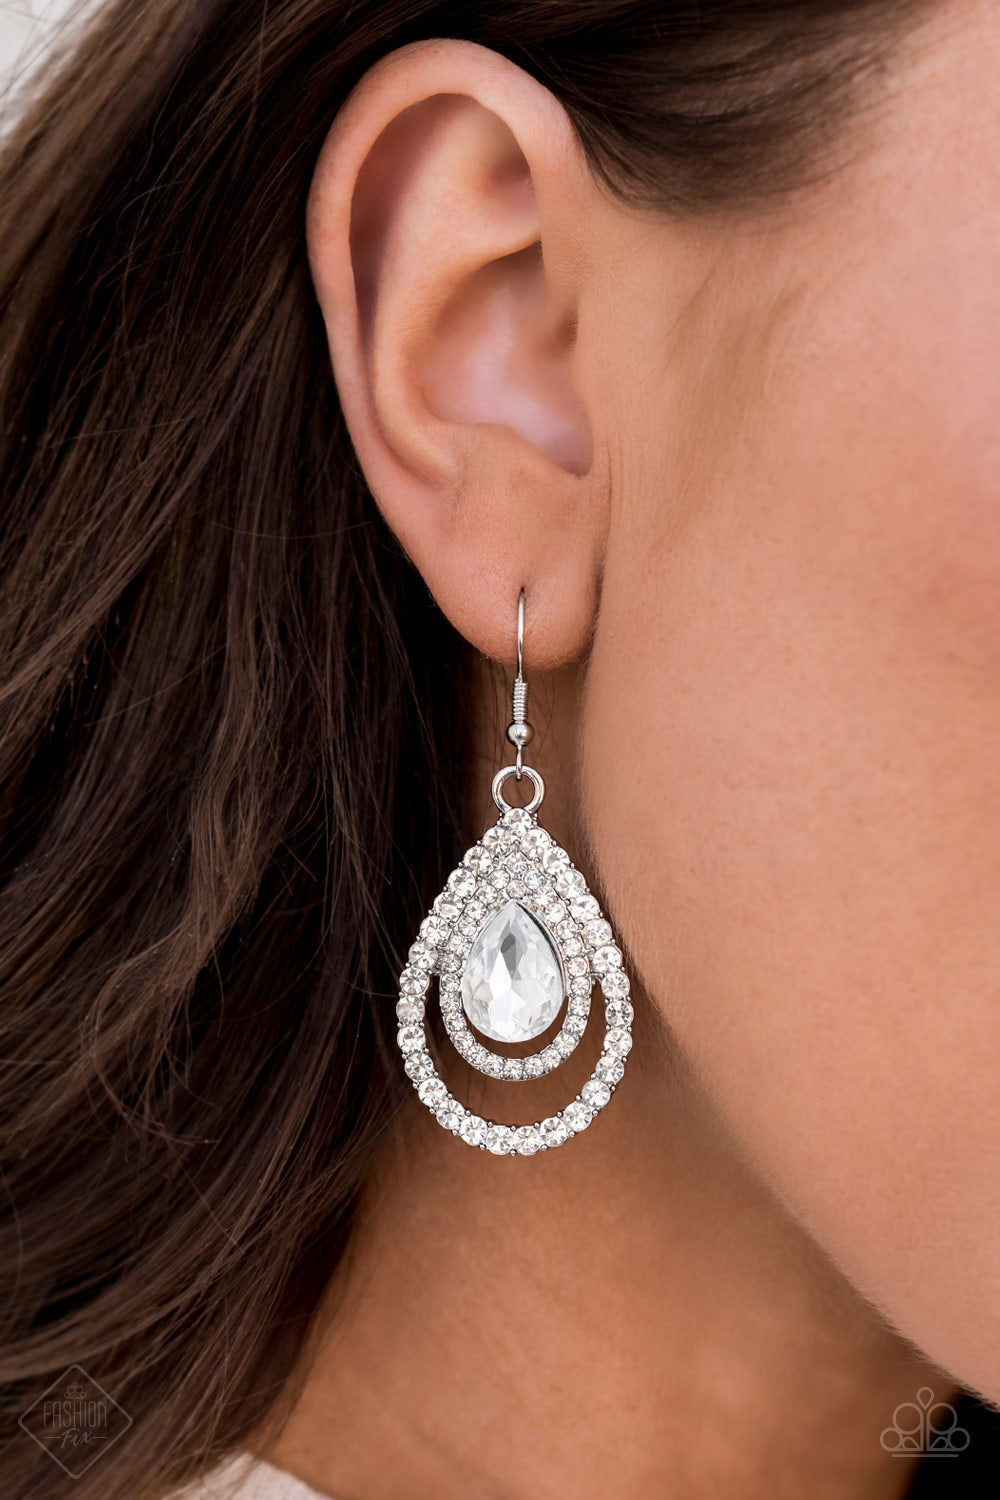 So The Story GLOWS White Earring - Paparazzi Accessories